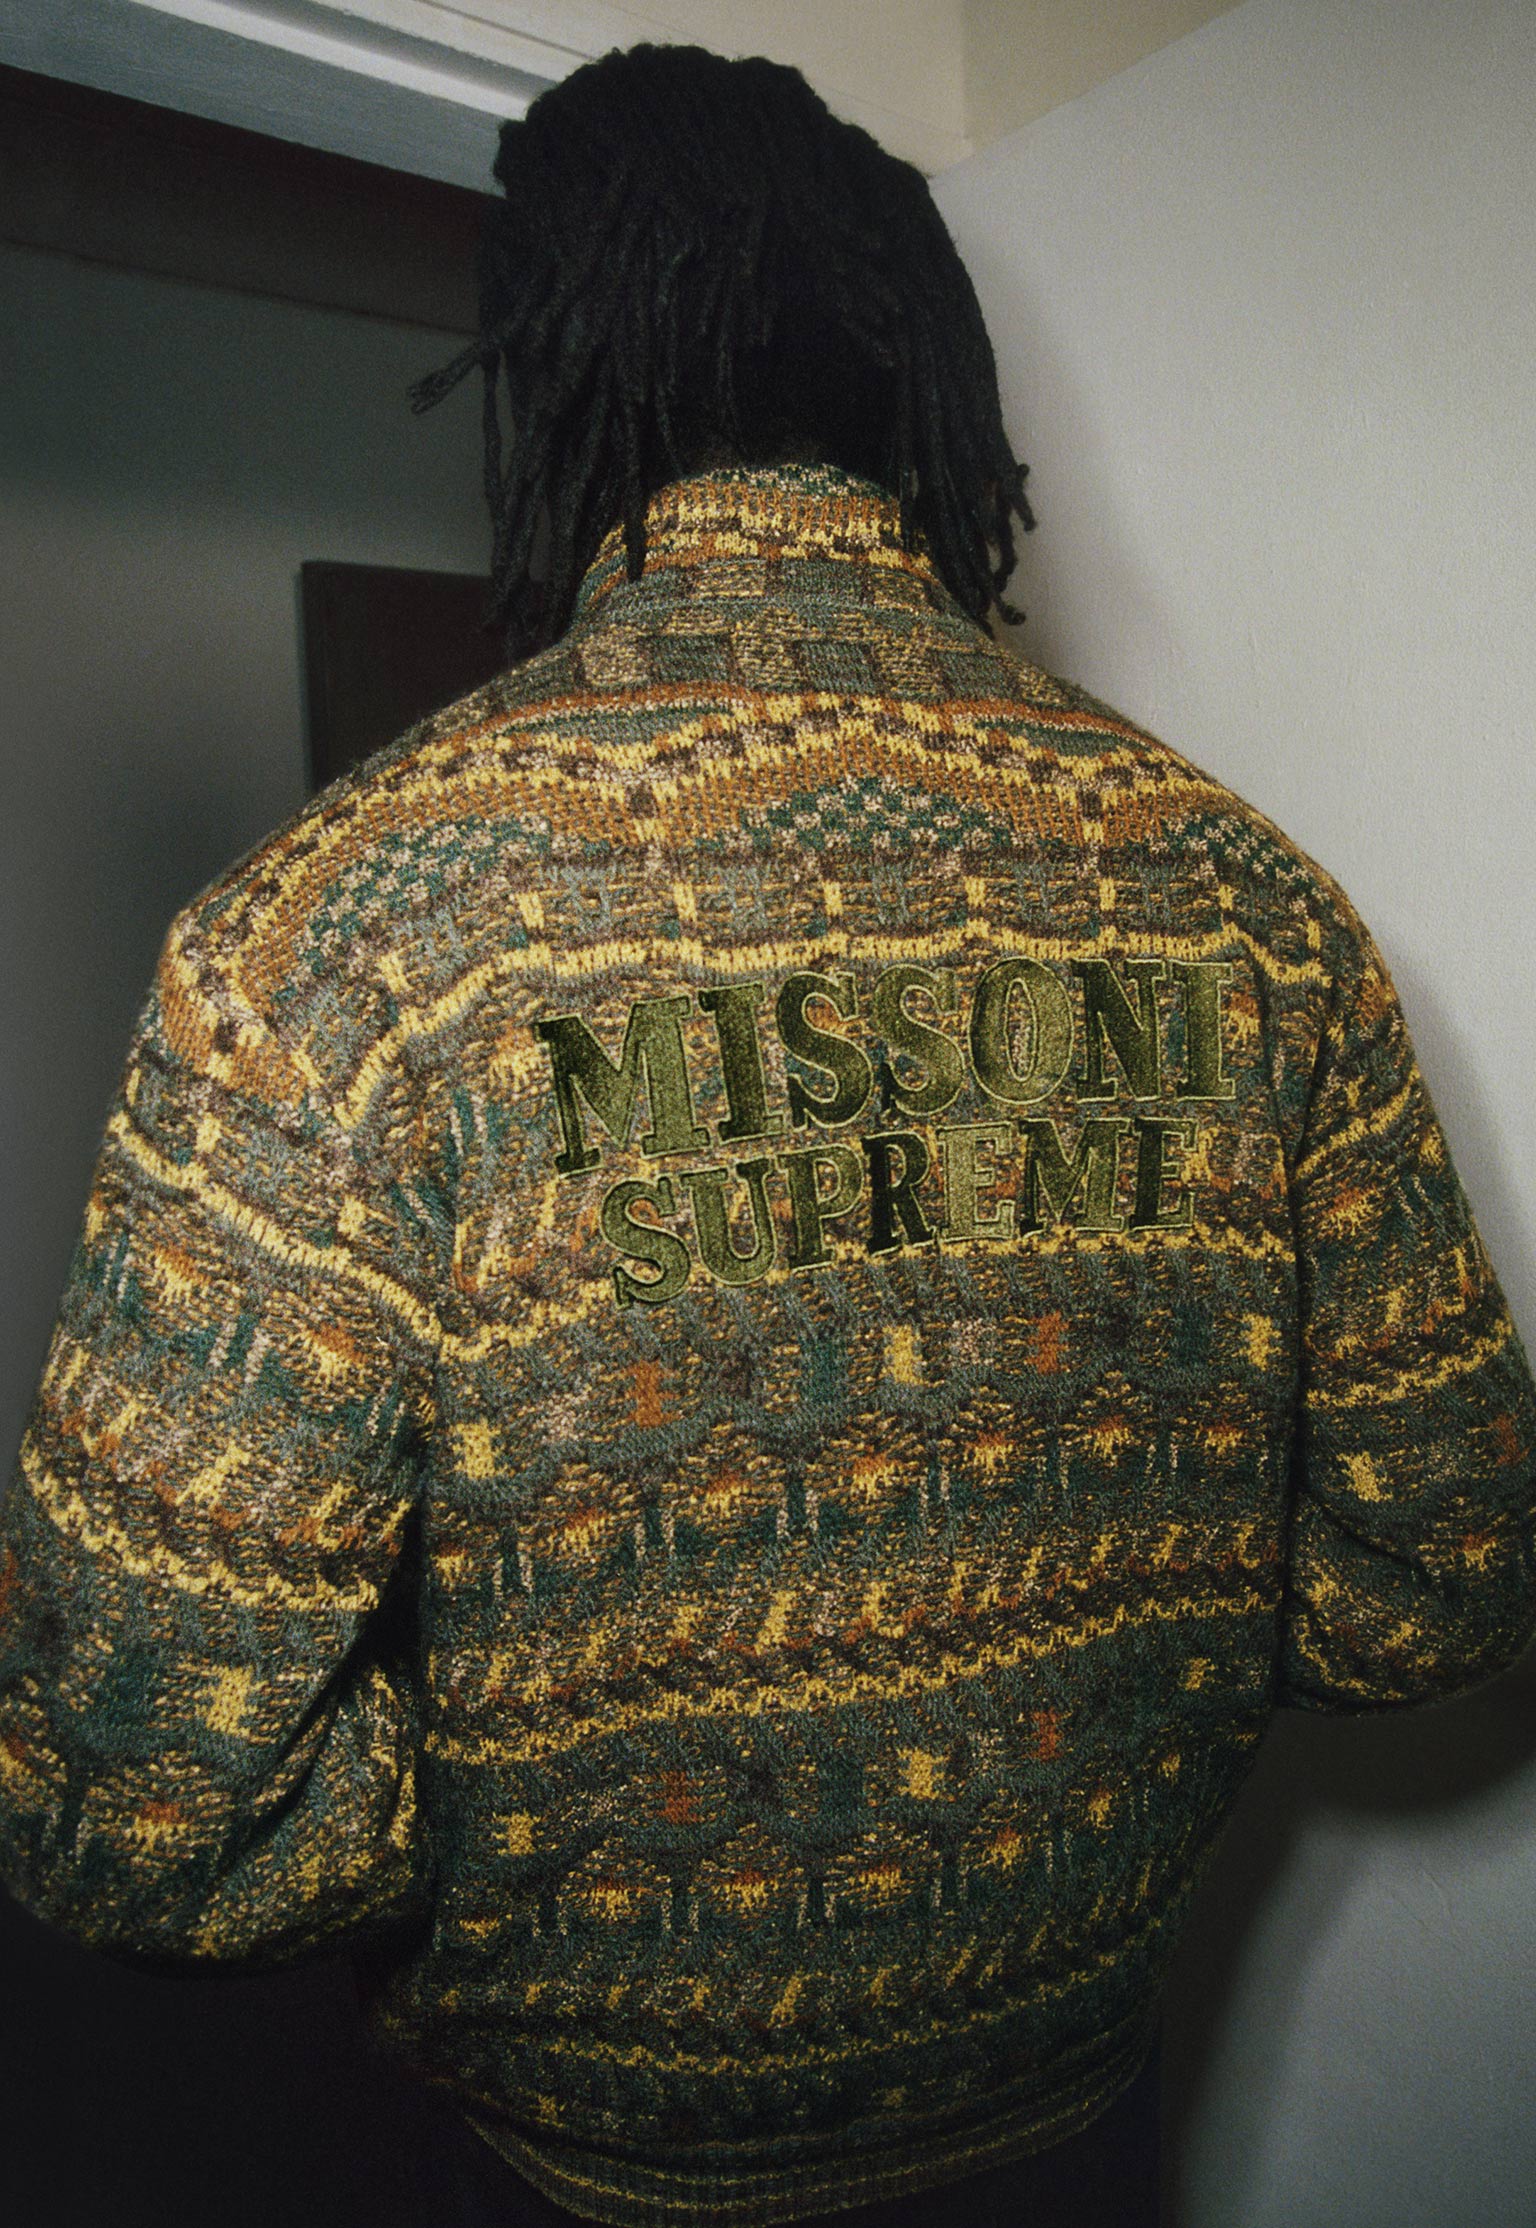 The model who is seen from the back is wearing a green jacket with interesting motifs